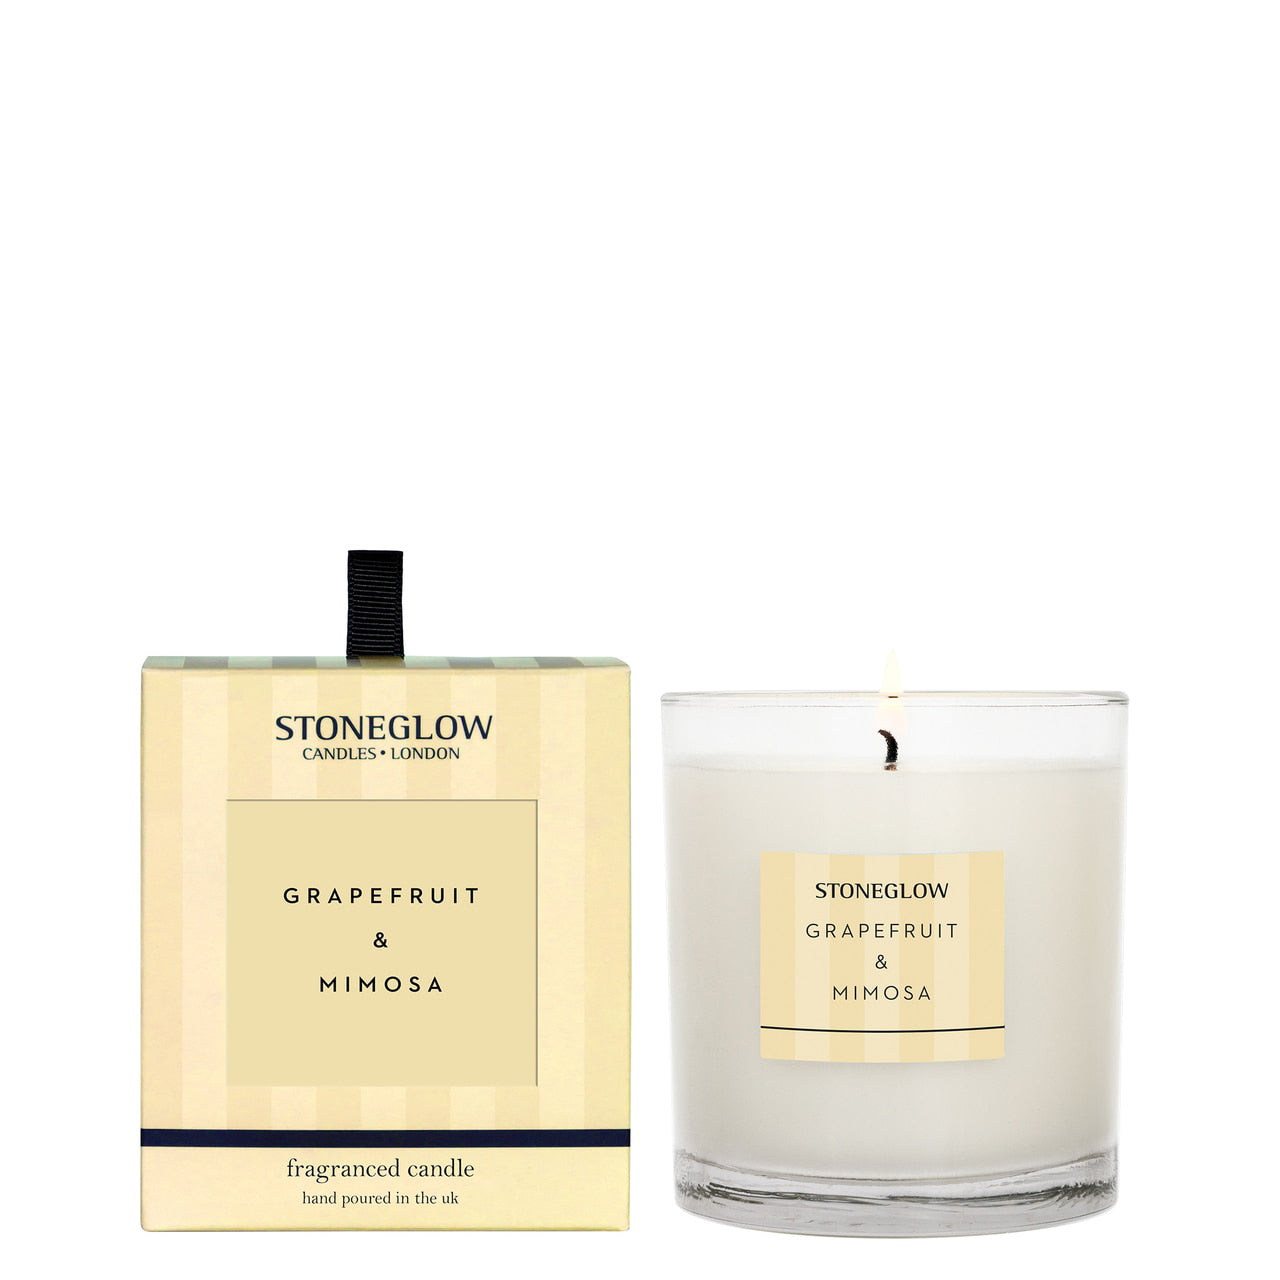 Grapefruit & Mimosa Candle by Stoneglow